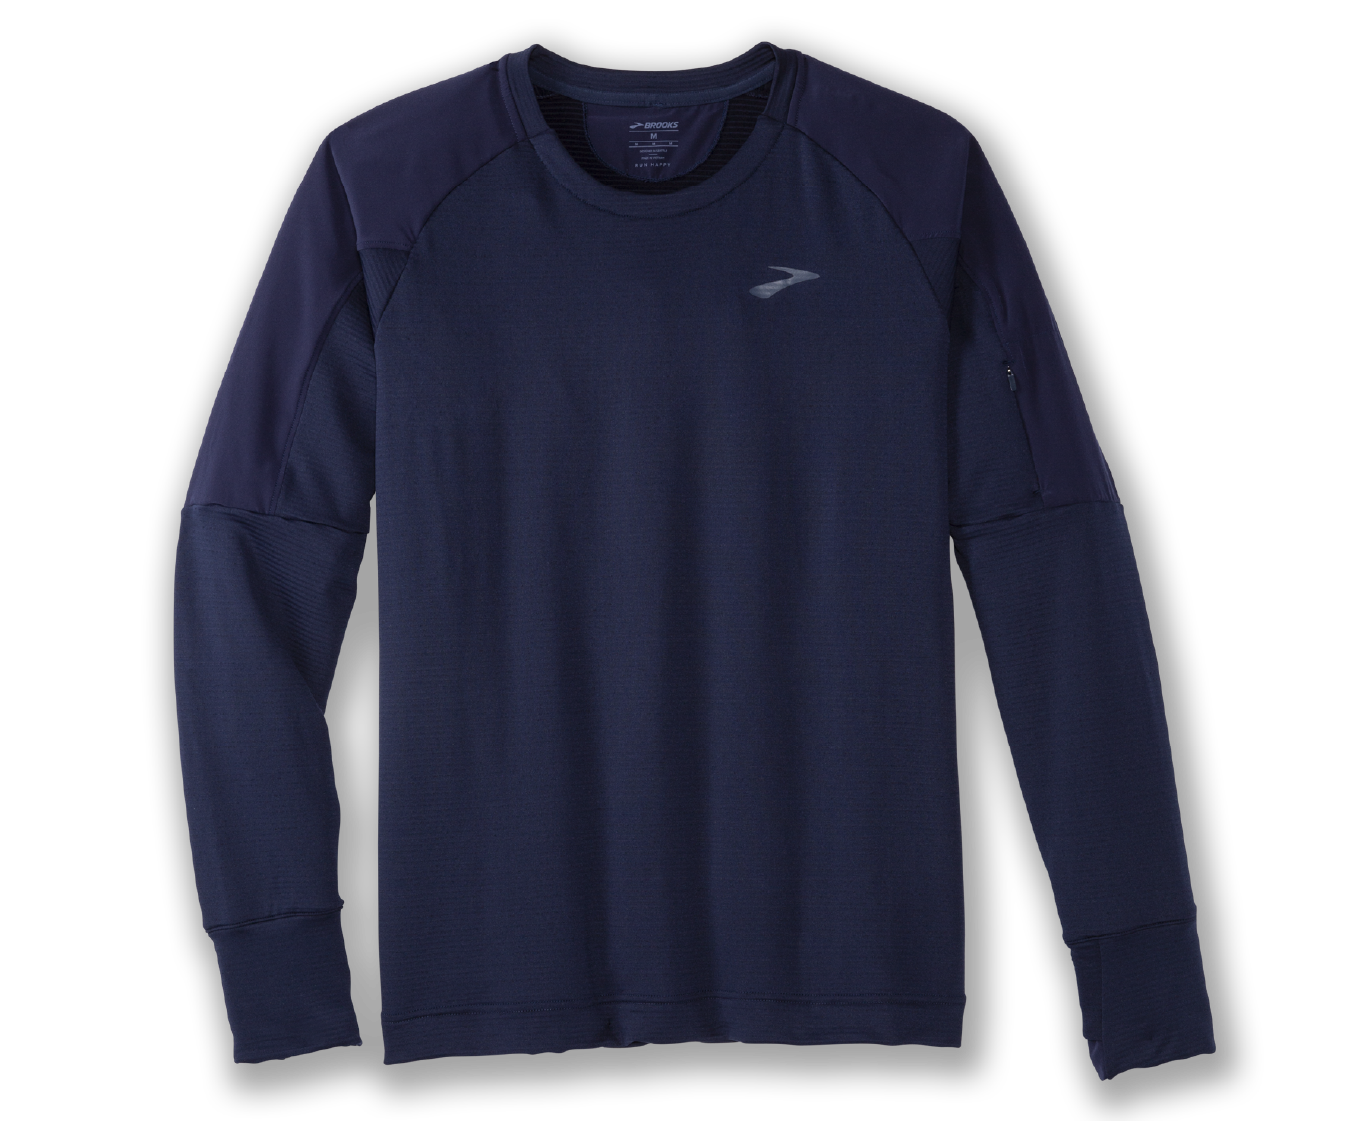 Notch Thermal Long Sleeve